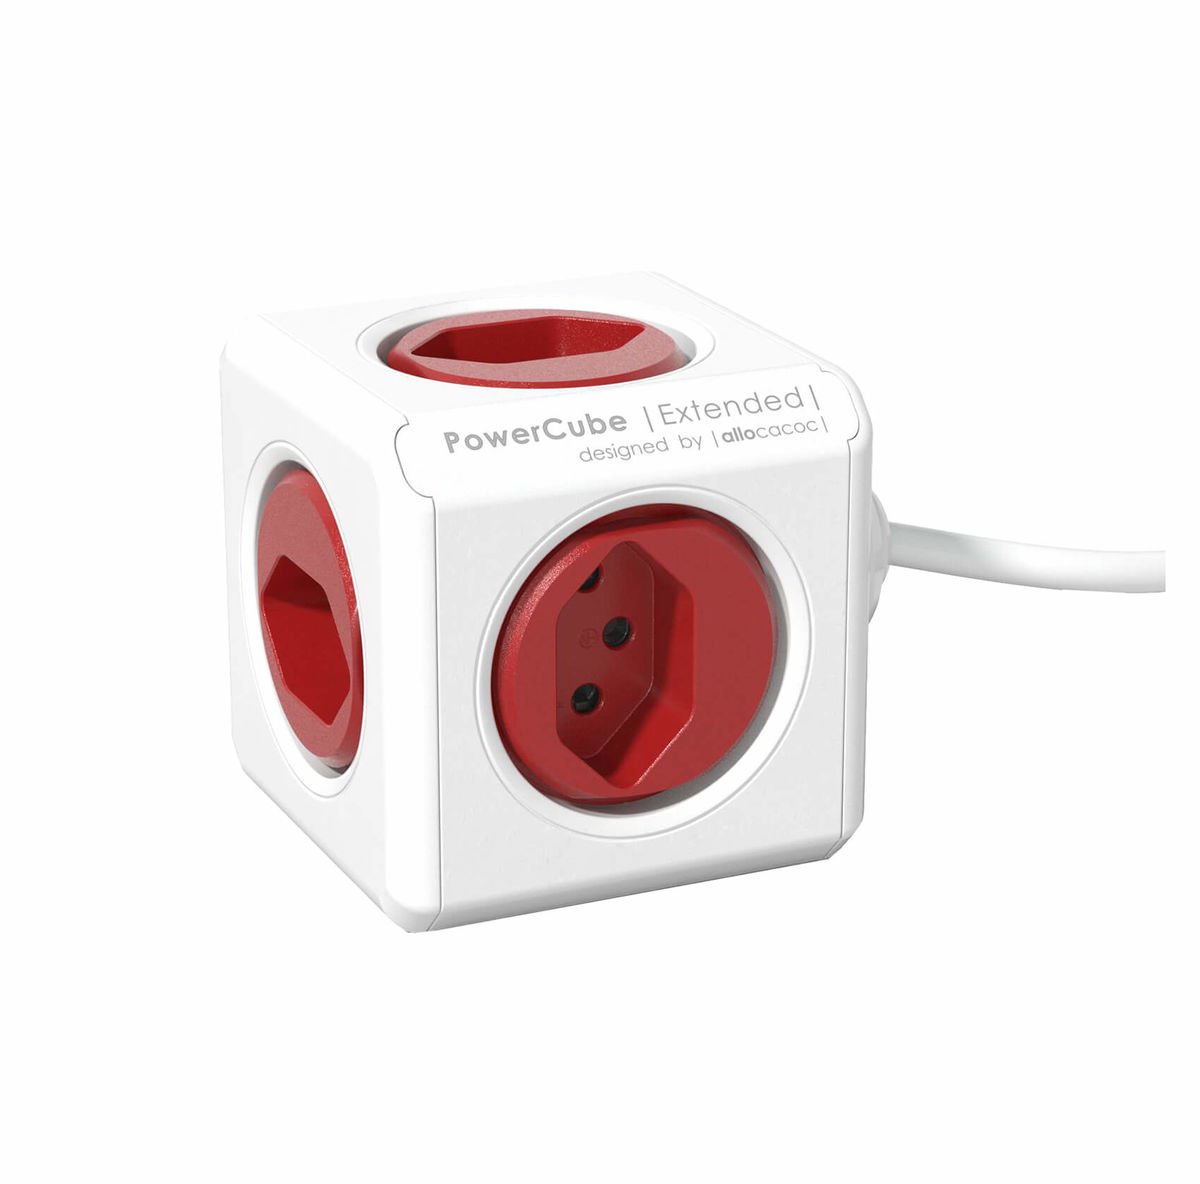 Image of Allocacoc PowerCube Extended USB 1.5m Steckdosenleiste rot bei nettoshop.ch